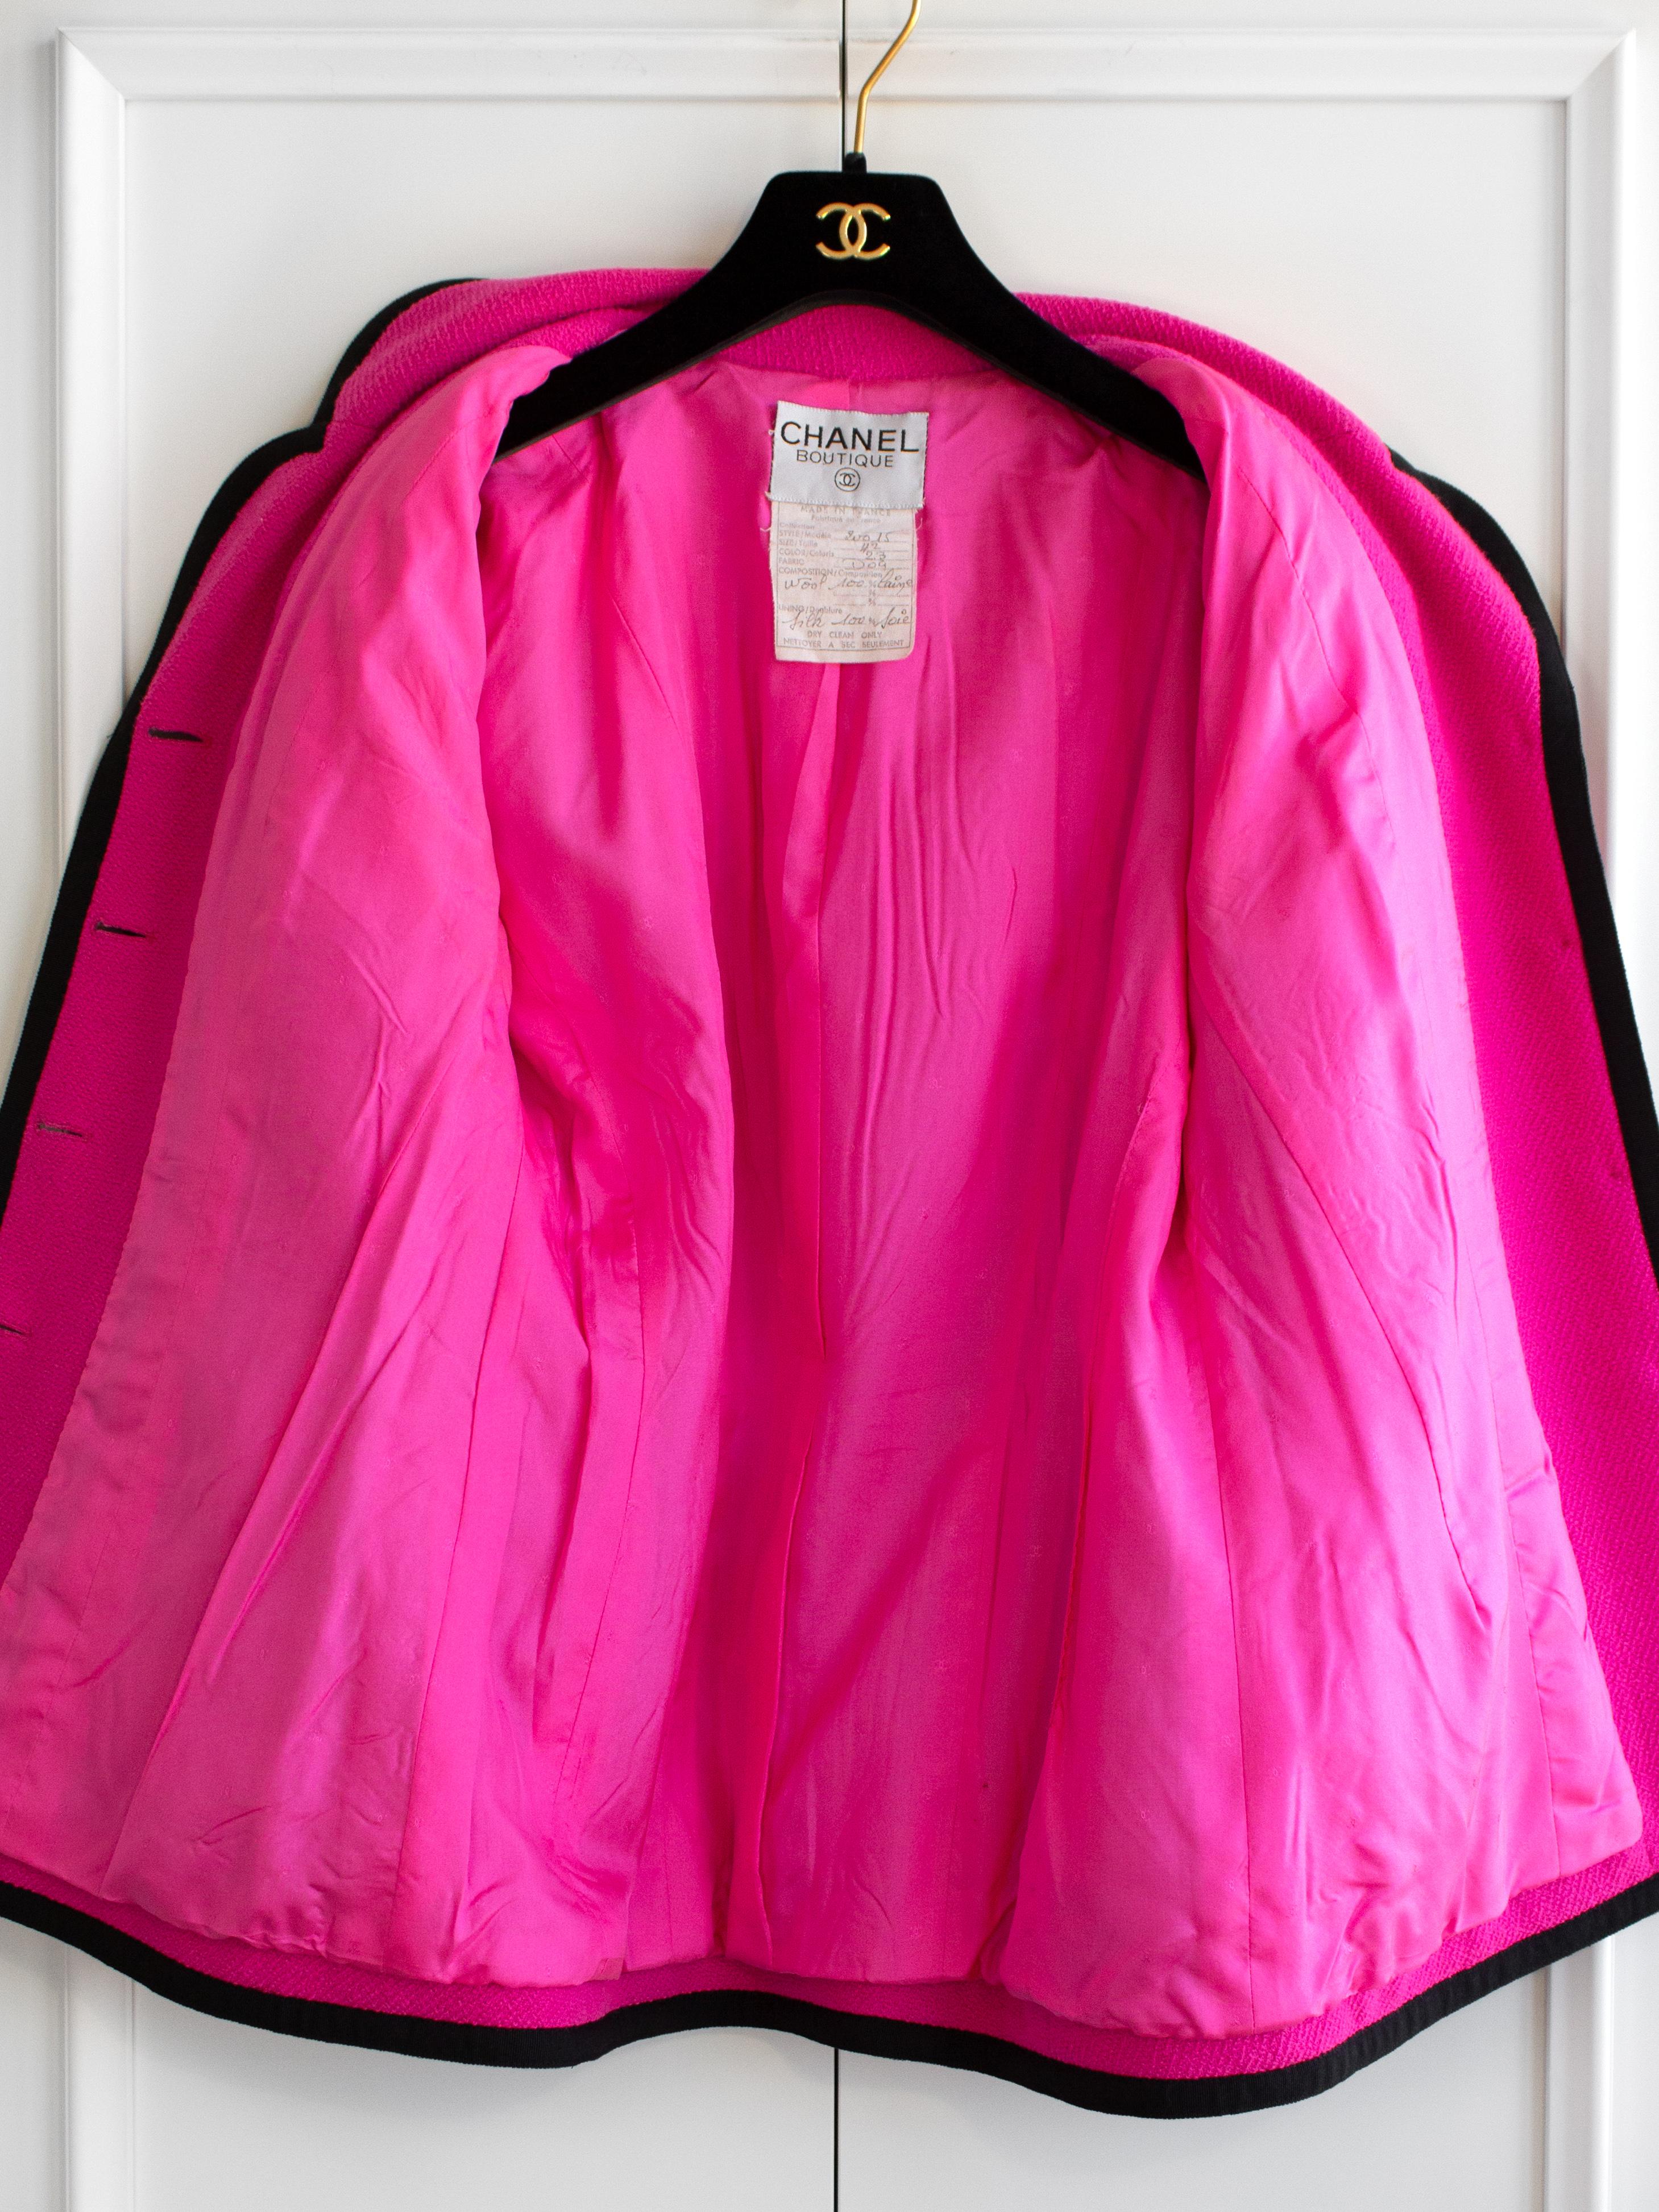 Chanel Vintage S/S 1991 Collector Fuchsia Pink Black Wool Jacket Skirt Suit For Sale 7